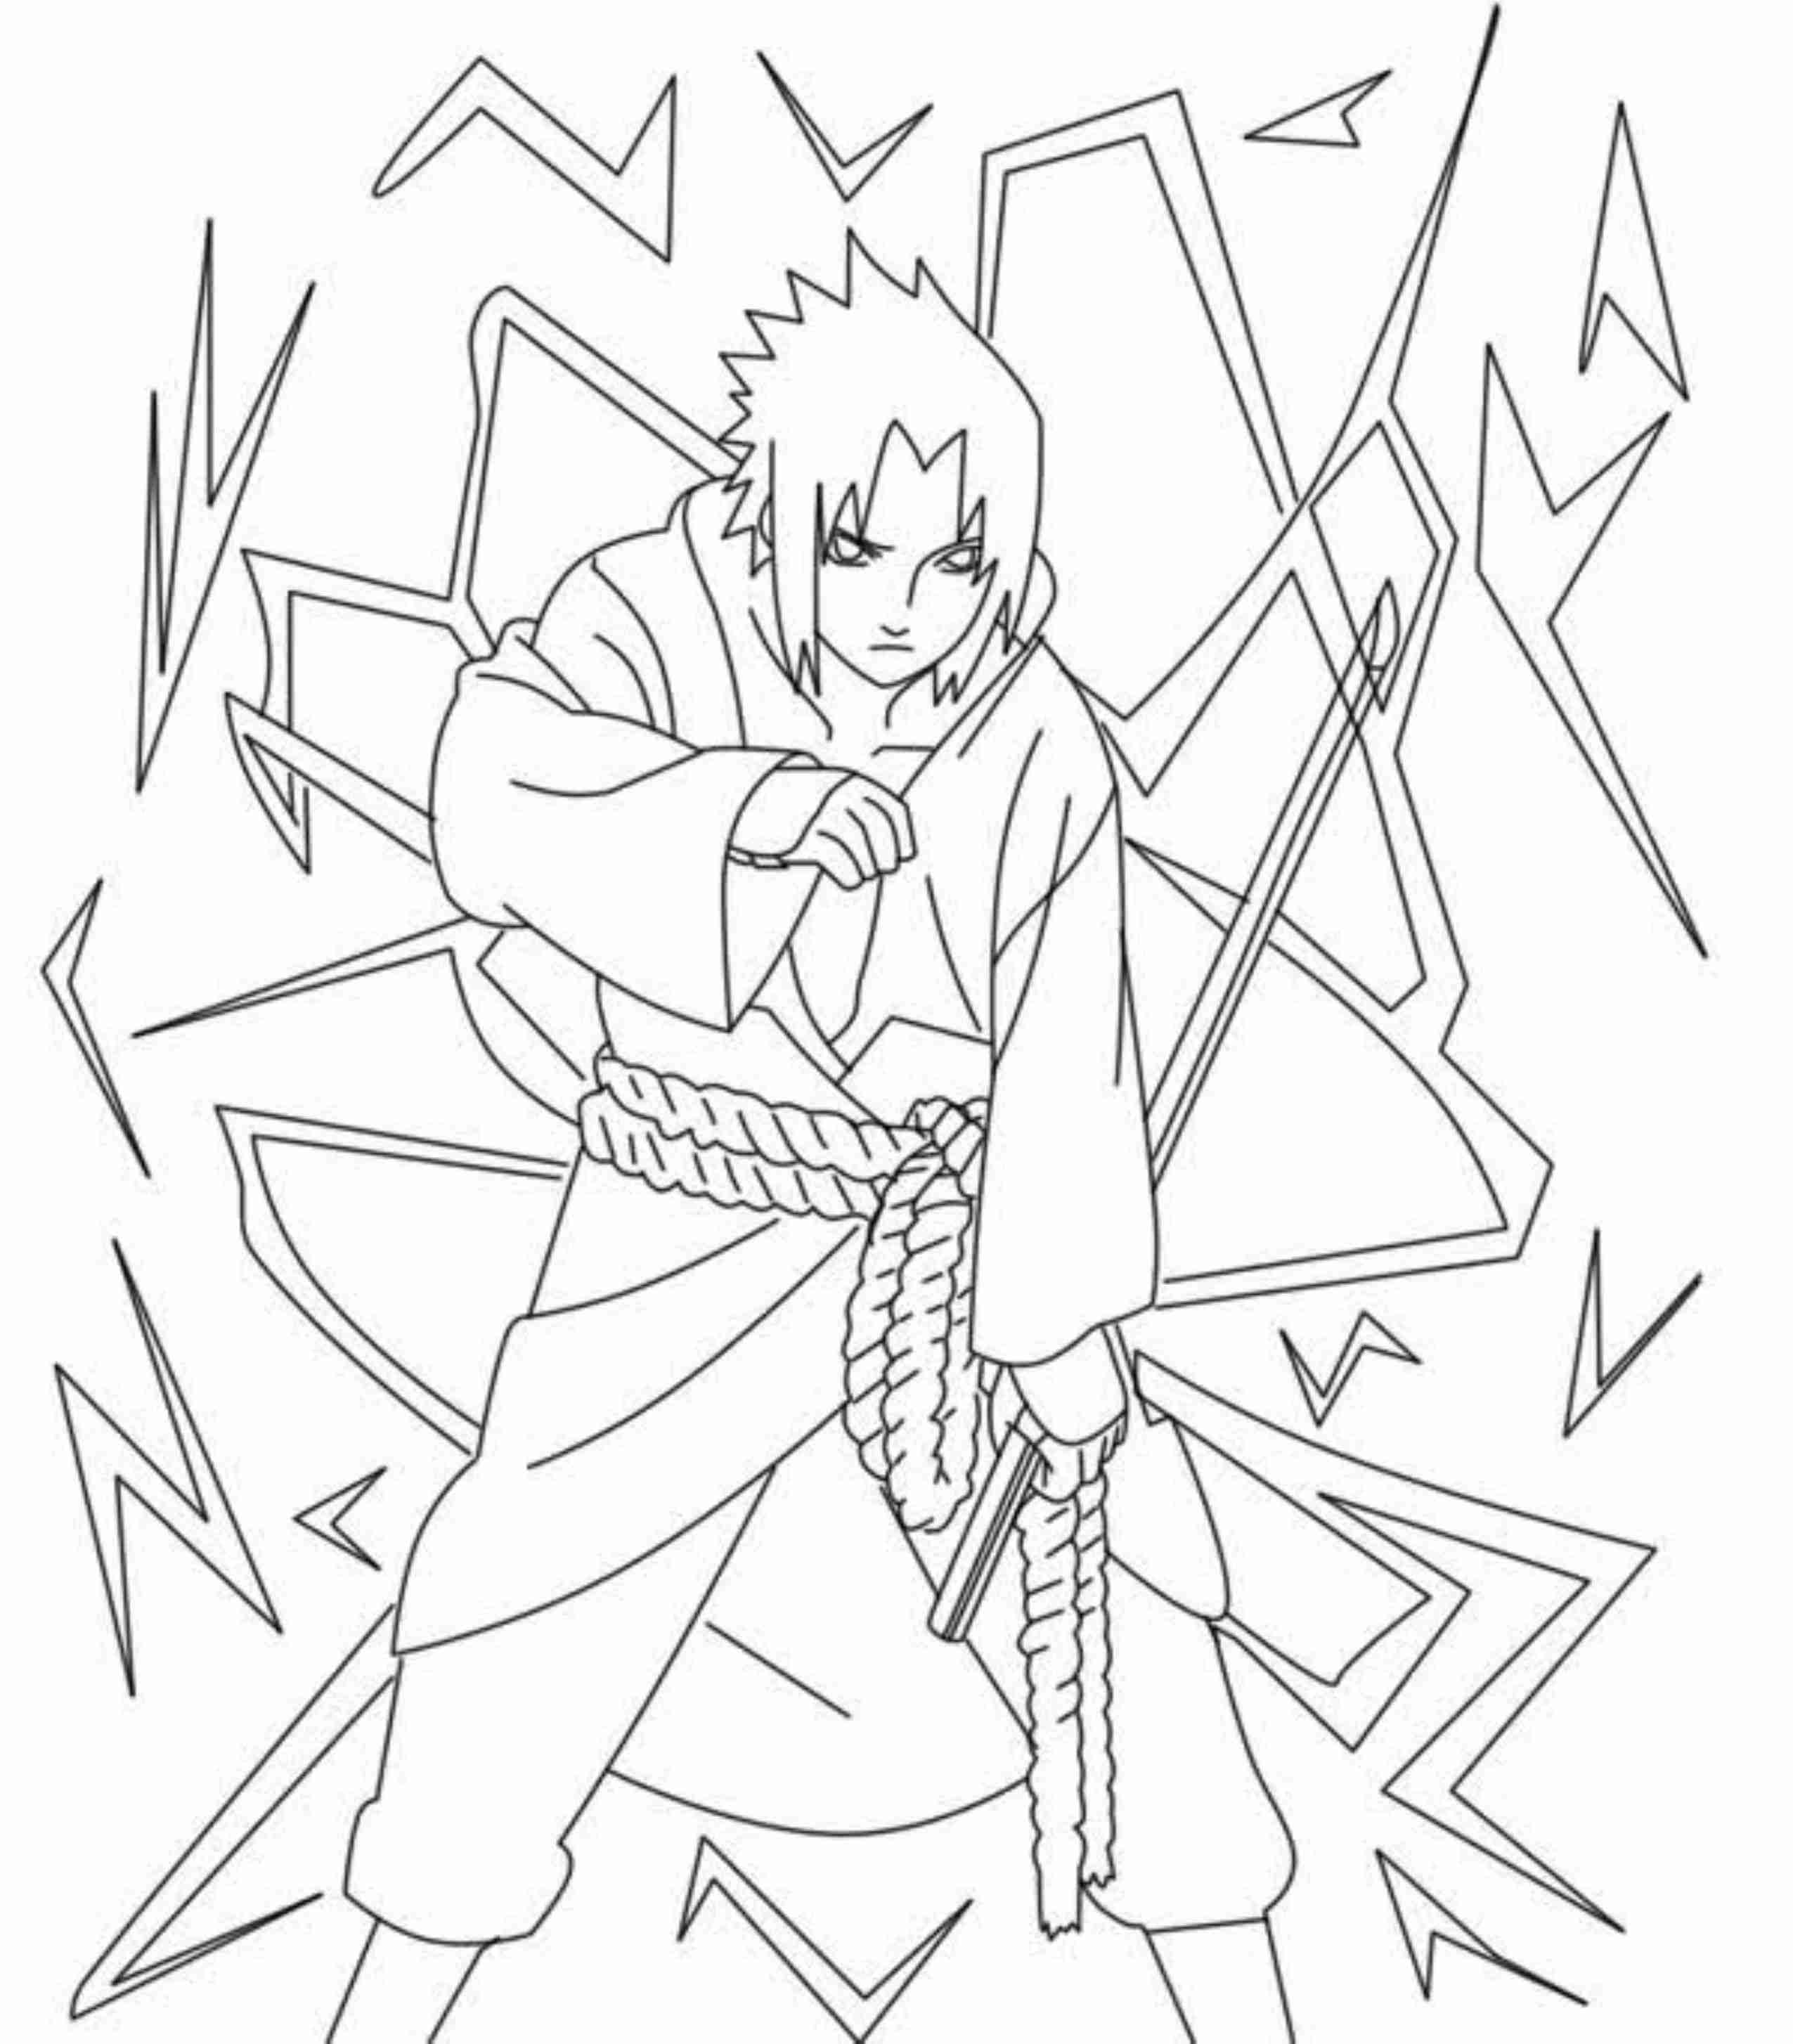 Akatsuki Coloring Pages - Free Printable Coloring Pages for Kids